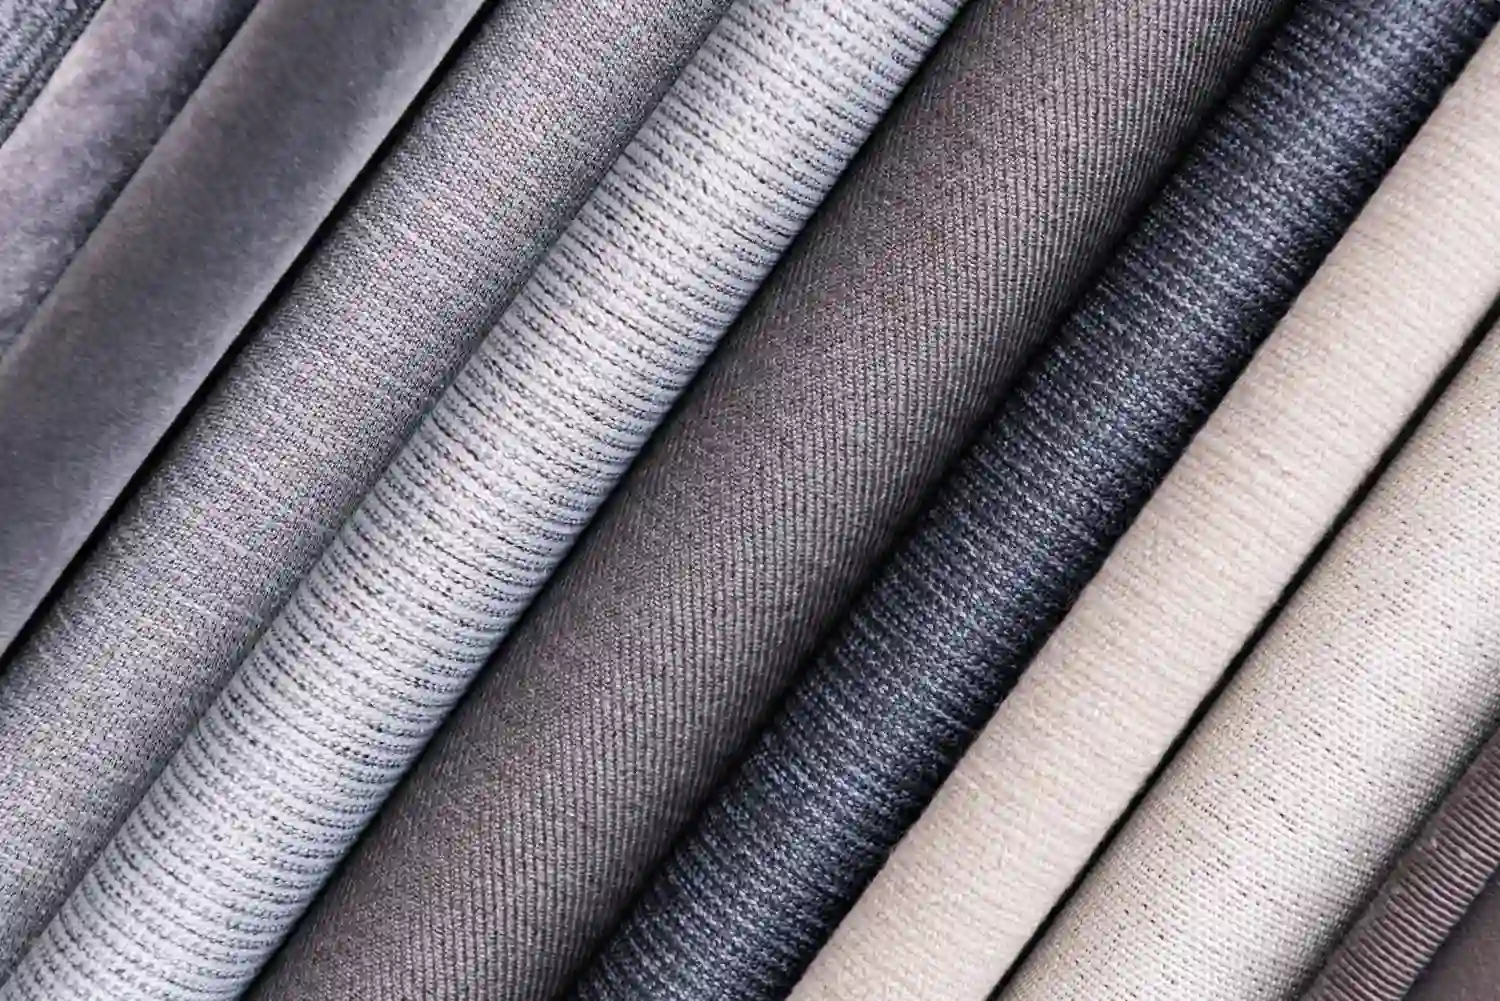 A close up view of a variety of gray polyester fabrics.